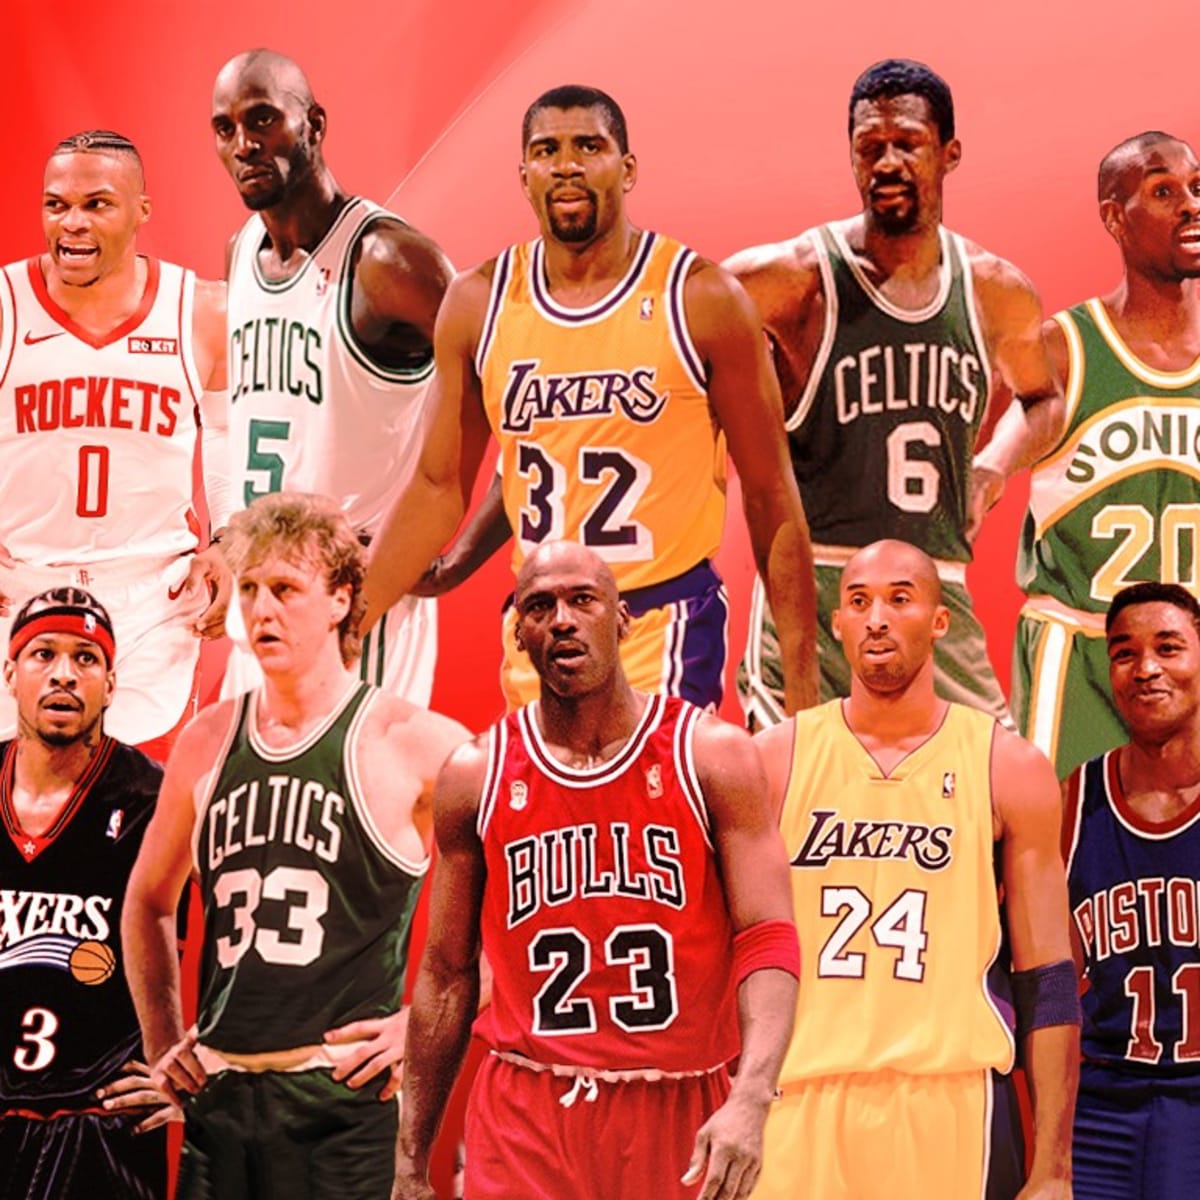 Basketball Forever - ESPN's TOP 10 NBA PLAYERS EVER: 1) Michael